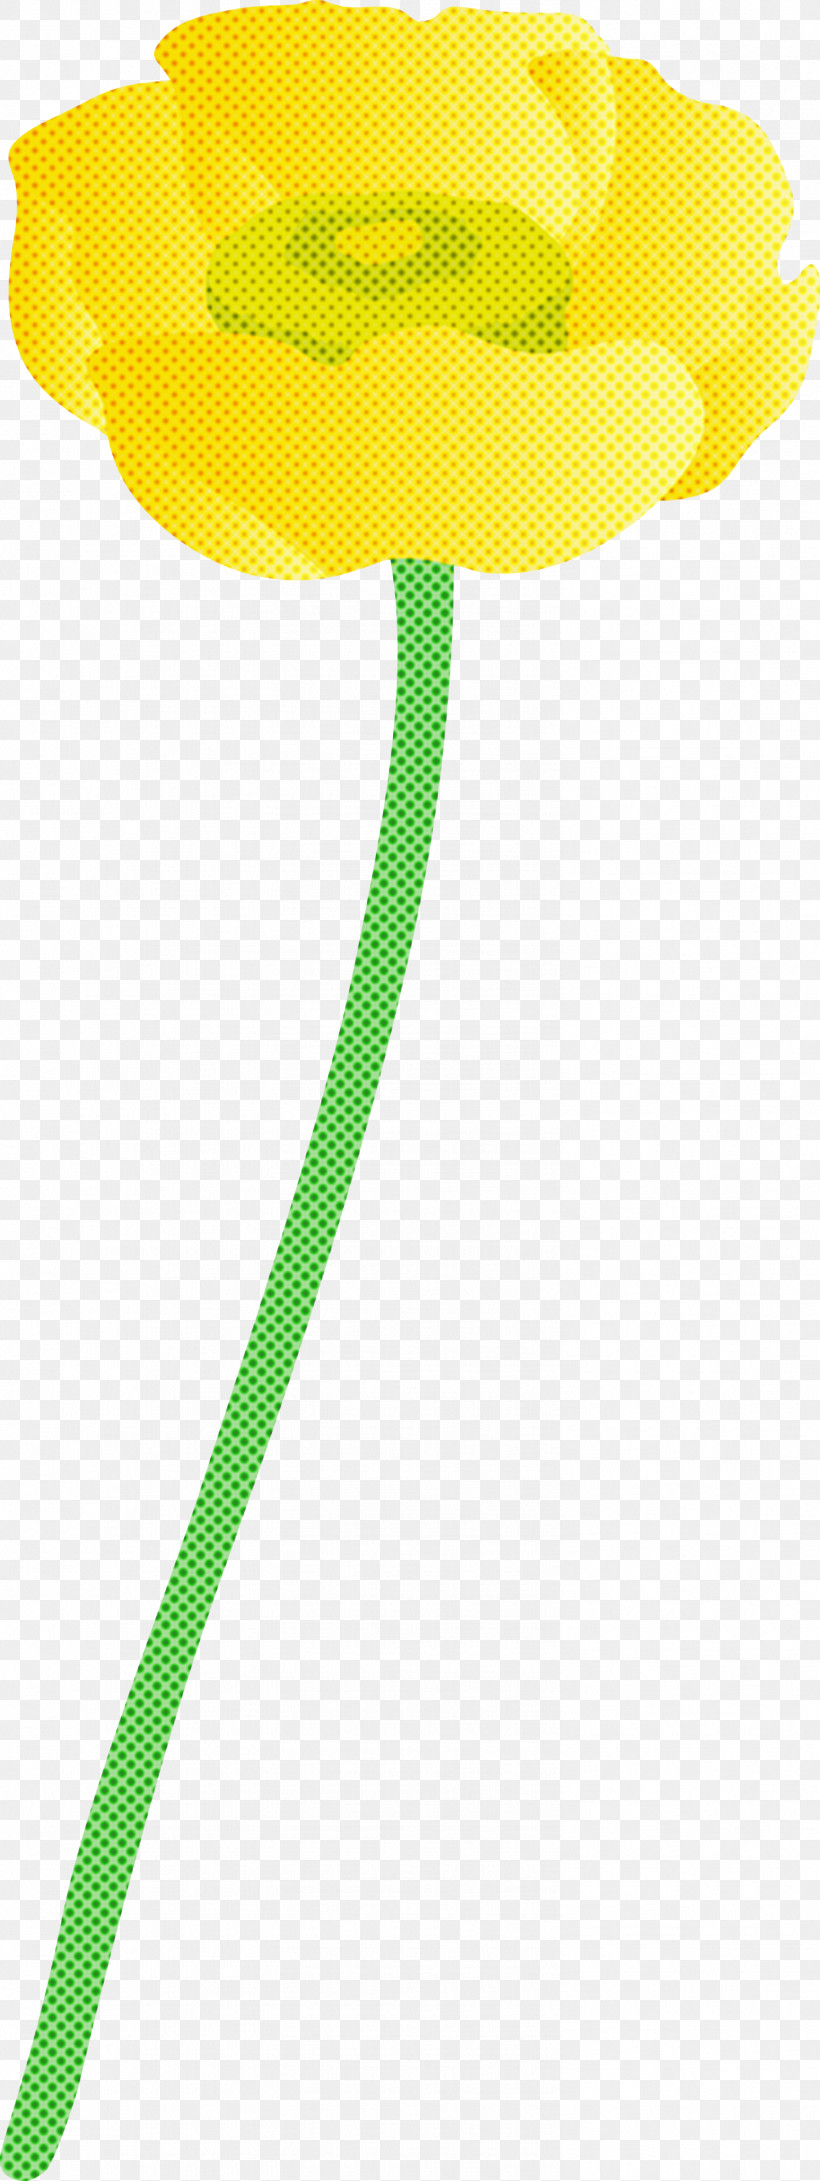 Yellow Line Smile, PNG, 1492x3969px, Yellow, Line, Smile Download Free